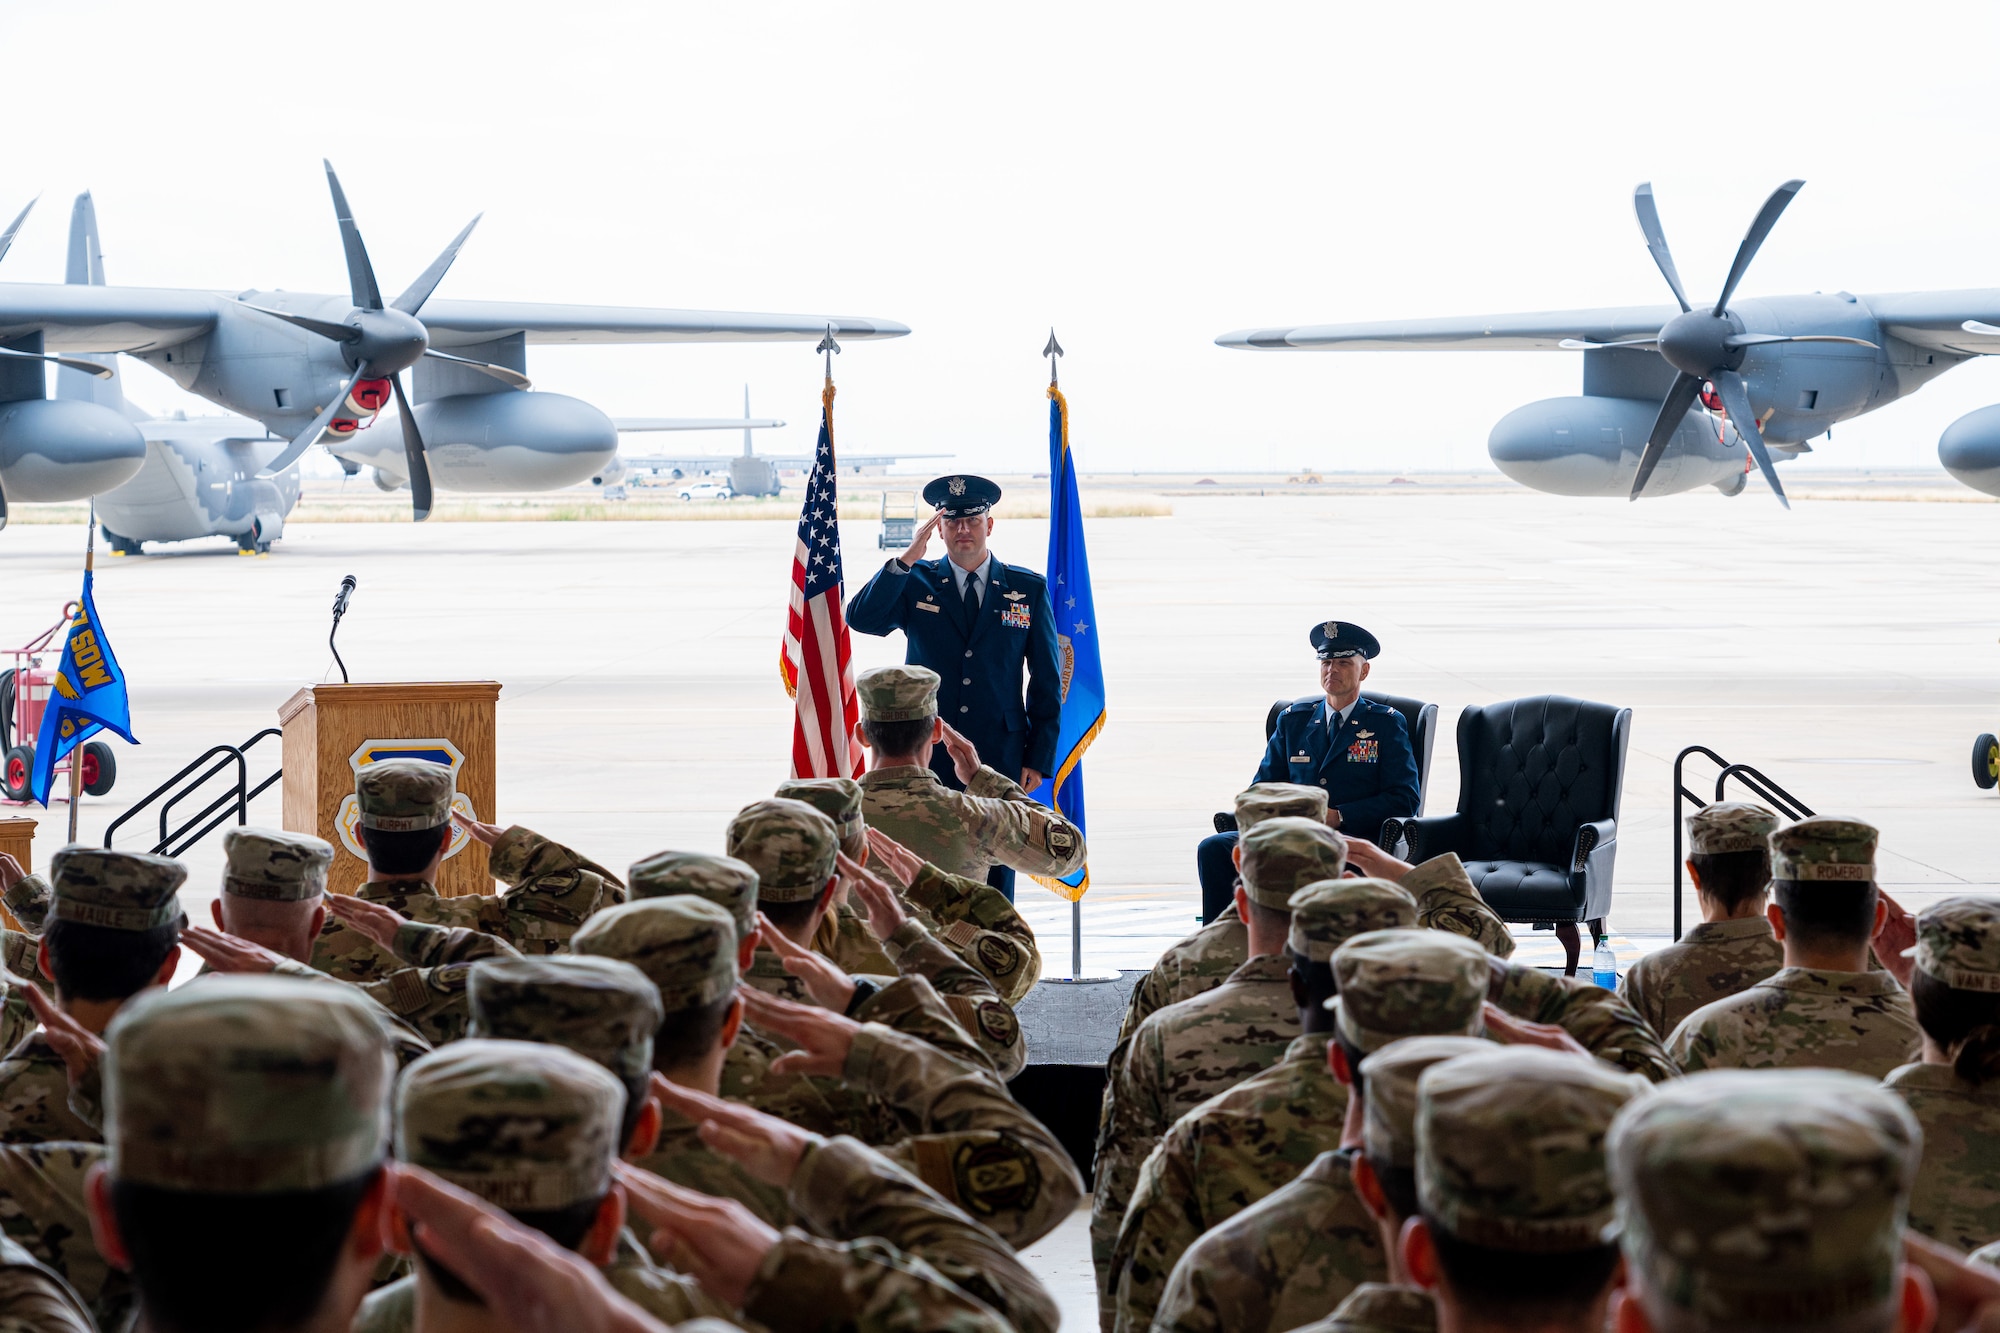 Lt. Col. Michael Roy, 6th Special Operations Squadron commander, receives his first salute from the Airmen of the 6 SOS during the squadron’s activation ceremony at Cannon Air Force Base, N.M., Oct. 6, 2022. Previously the 27th Special Operations Group Detachment 1, the 6 SOS is an MC-130J Commando II aircraft flying unit that fulfills the 27th Special Operations Wing’s commitment to the Air Force Special Operations Command’s new deployment model. (U.S. Air Force photo by Airman 1st Class Cassidy Daniel)